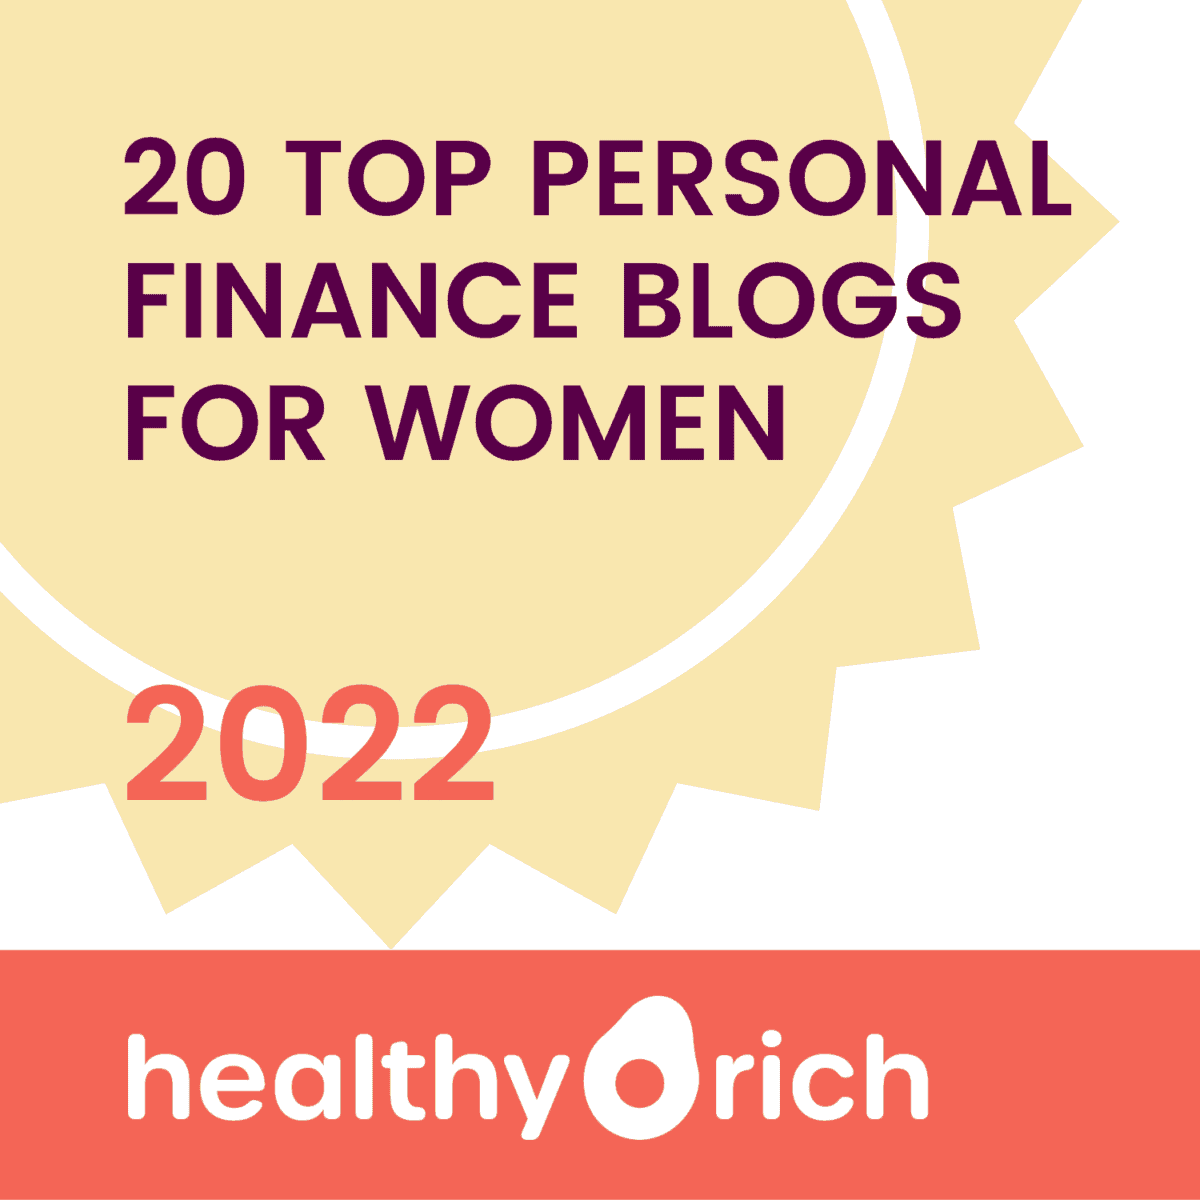 20 top personal finance blogs for women in 2022 by healthy rich, badge graphic